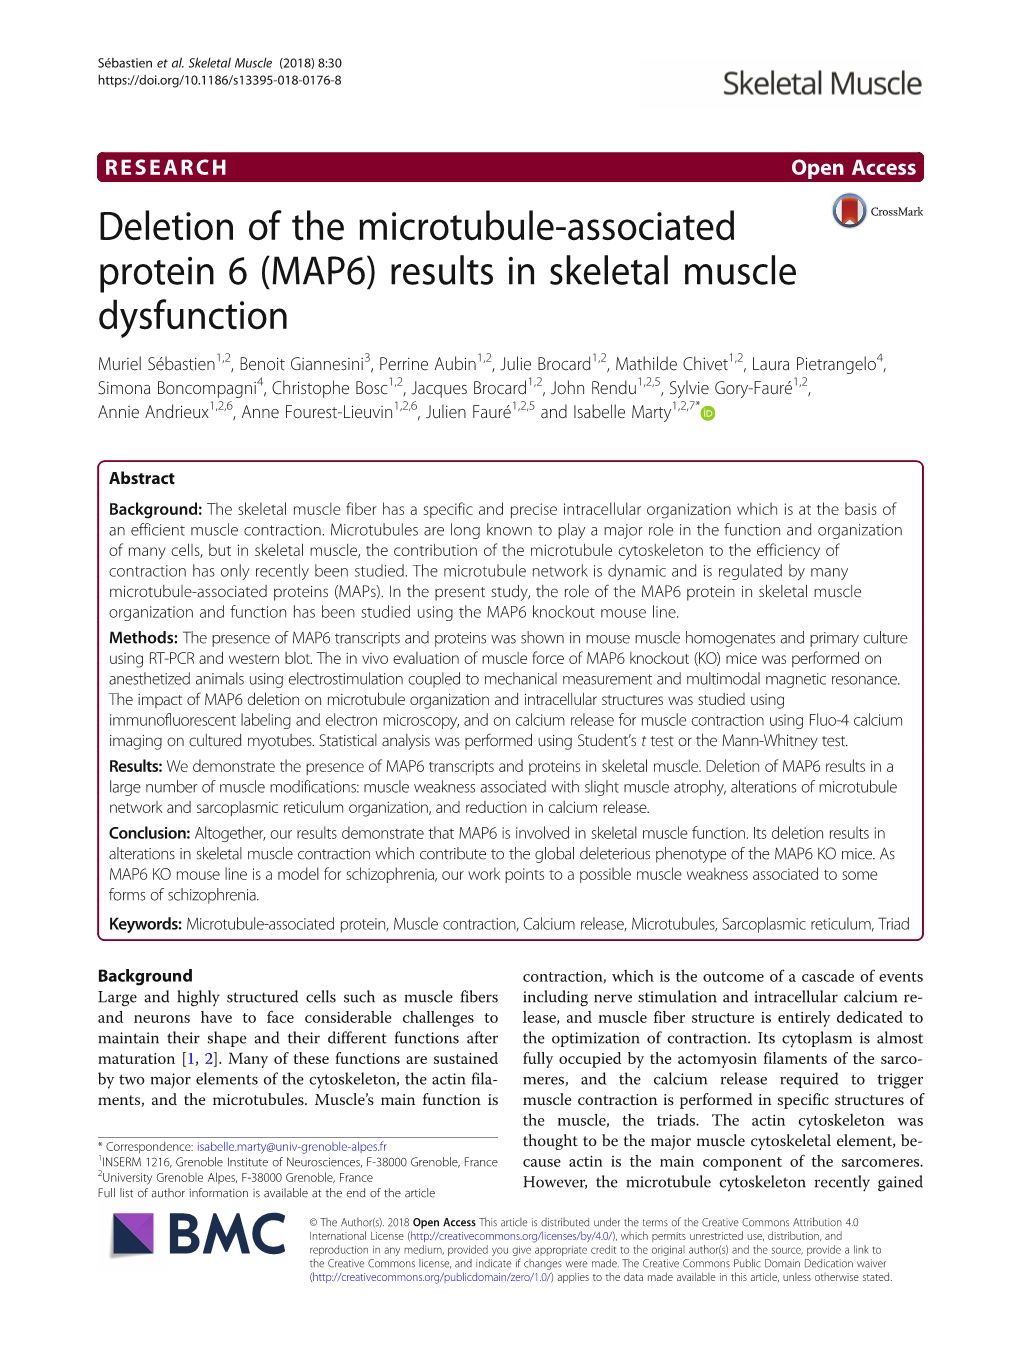 Deletion of the Microtubule-Associated Protein 6